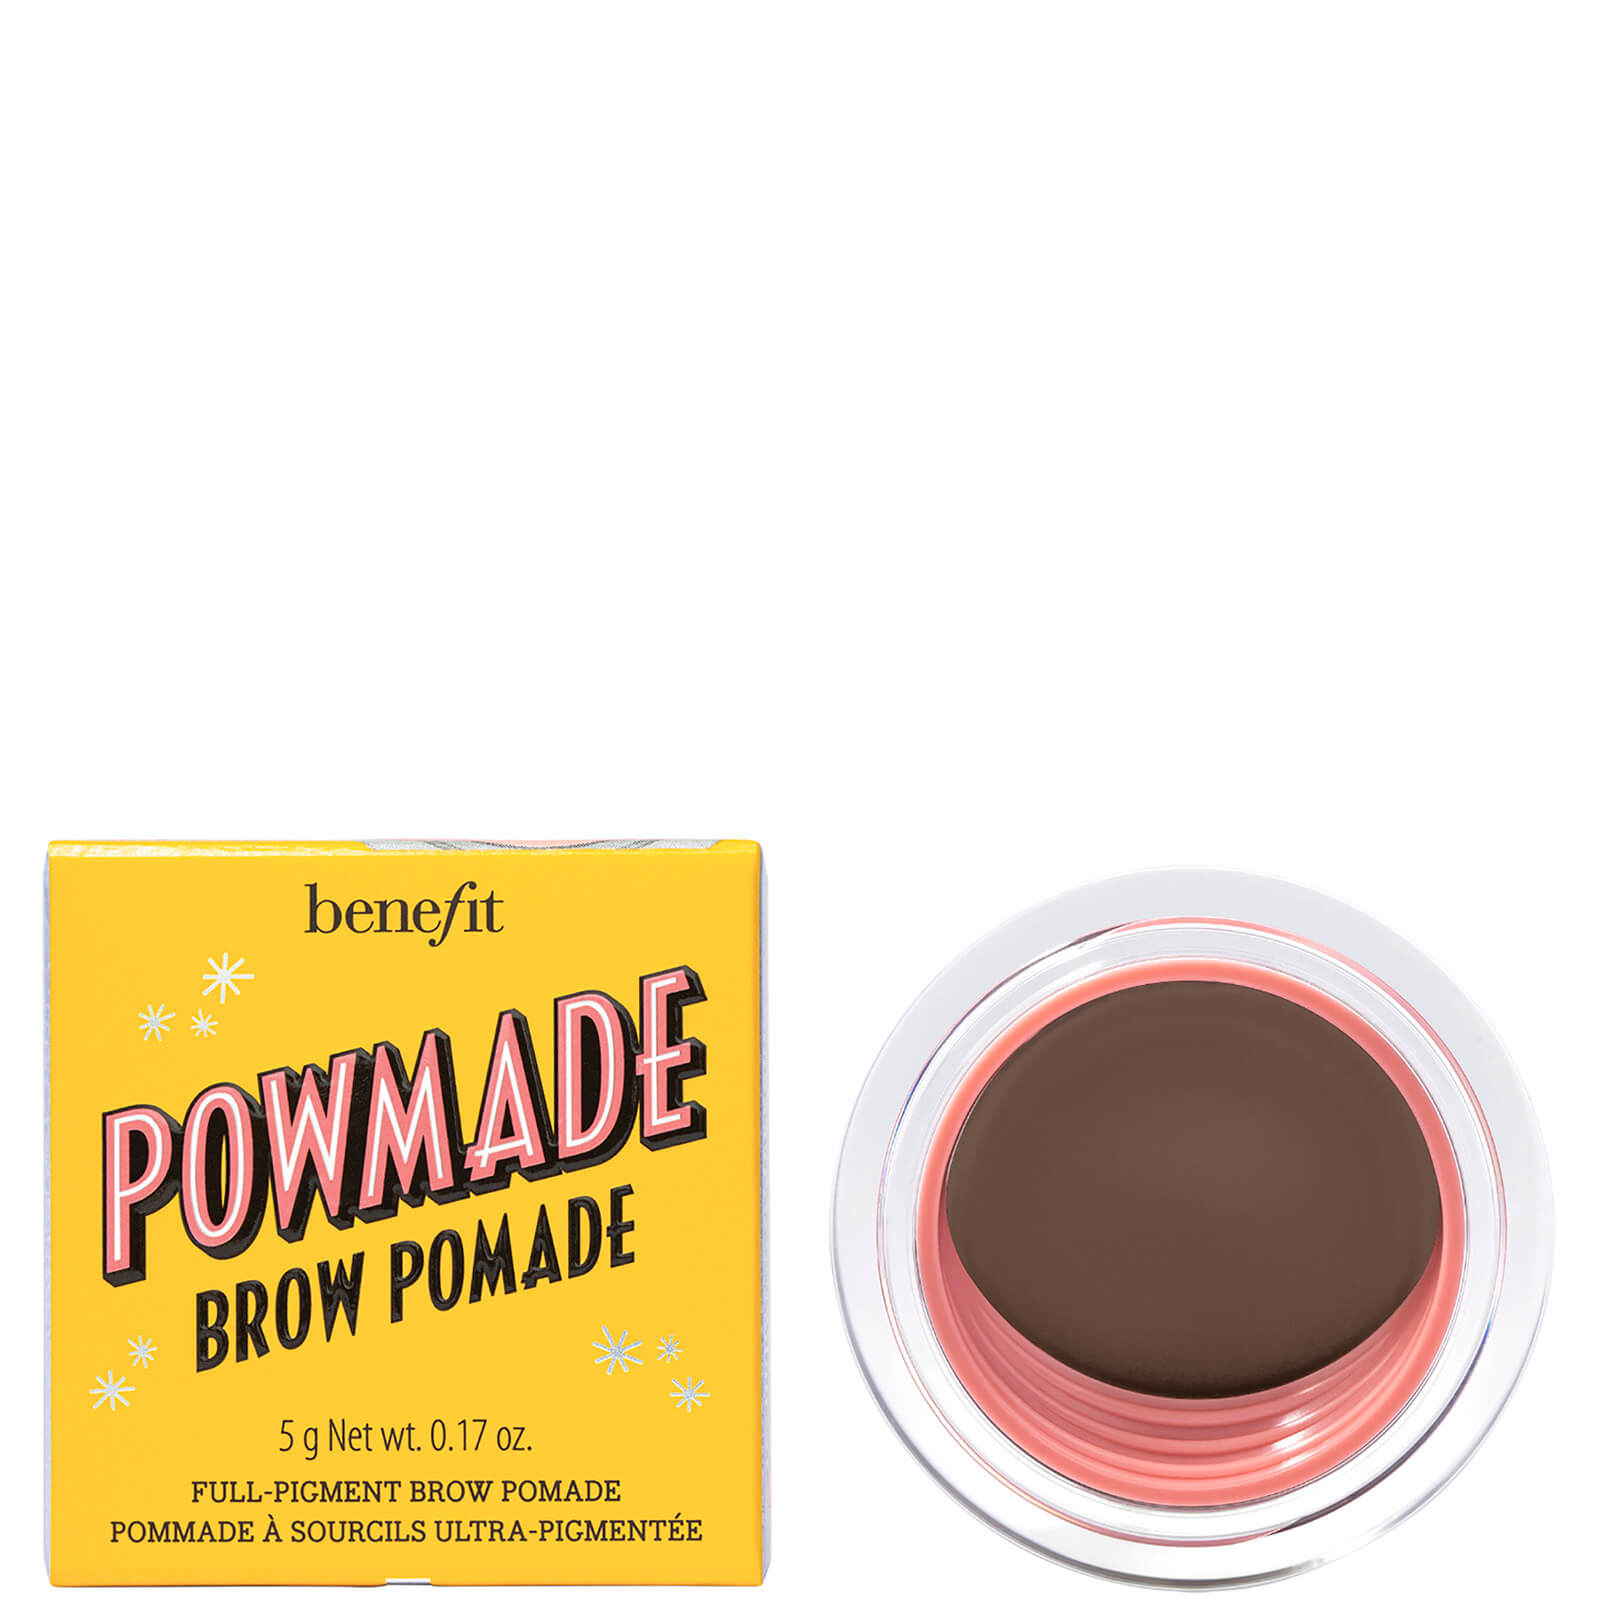 benefit Powmade Full Pigment Eyebrow Pomade 5g (Various Shades) - 3.75 Warm Deep Brown